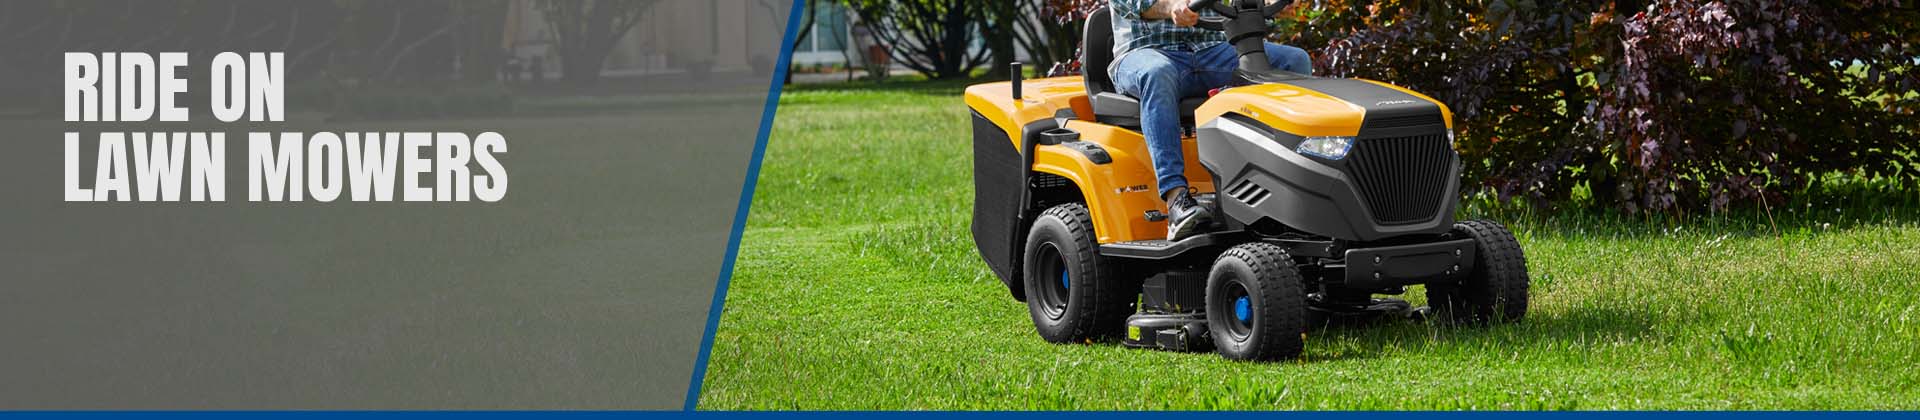 Ride On Lawn Mowers - SHOP NOW